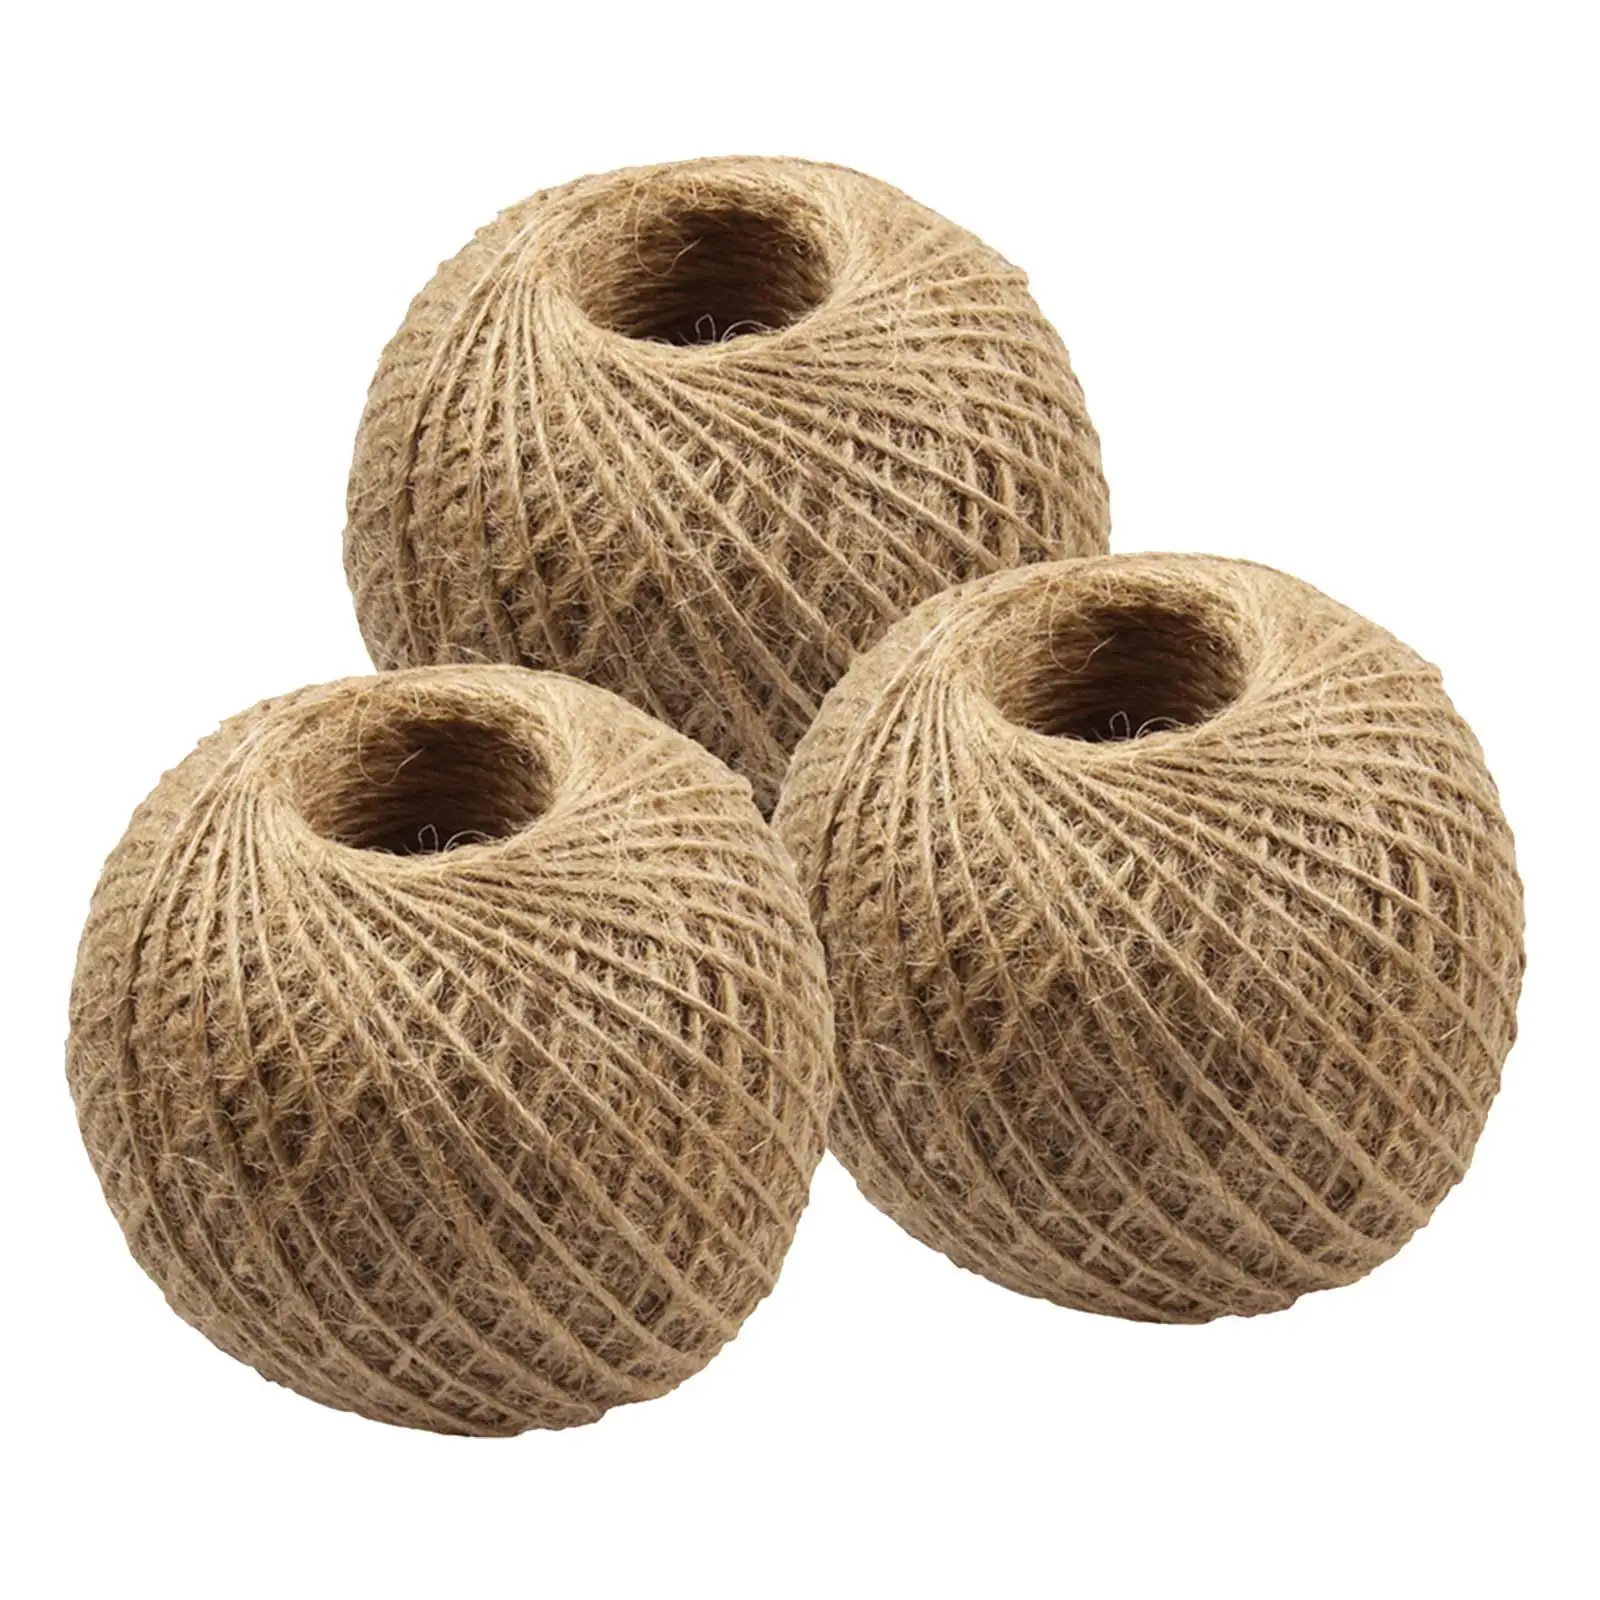 3Pcs Wedding Gift Wrap Decorative String 262.5ft 2mm Hemp Twine String for Gardening Arts Crafts Artworks Bakery Boxes Wrapping